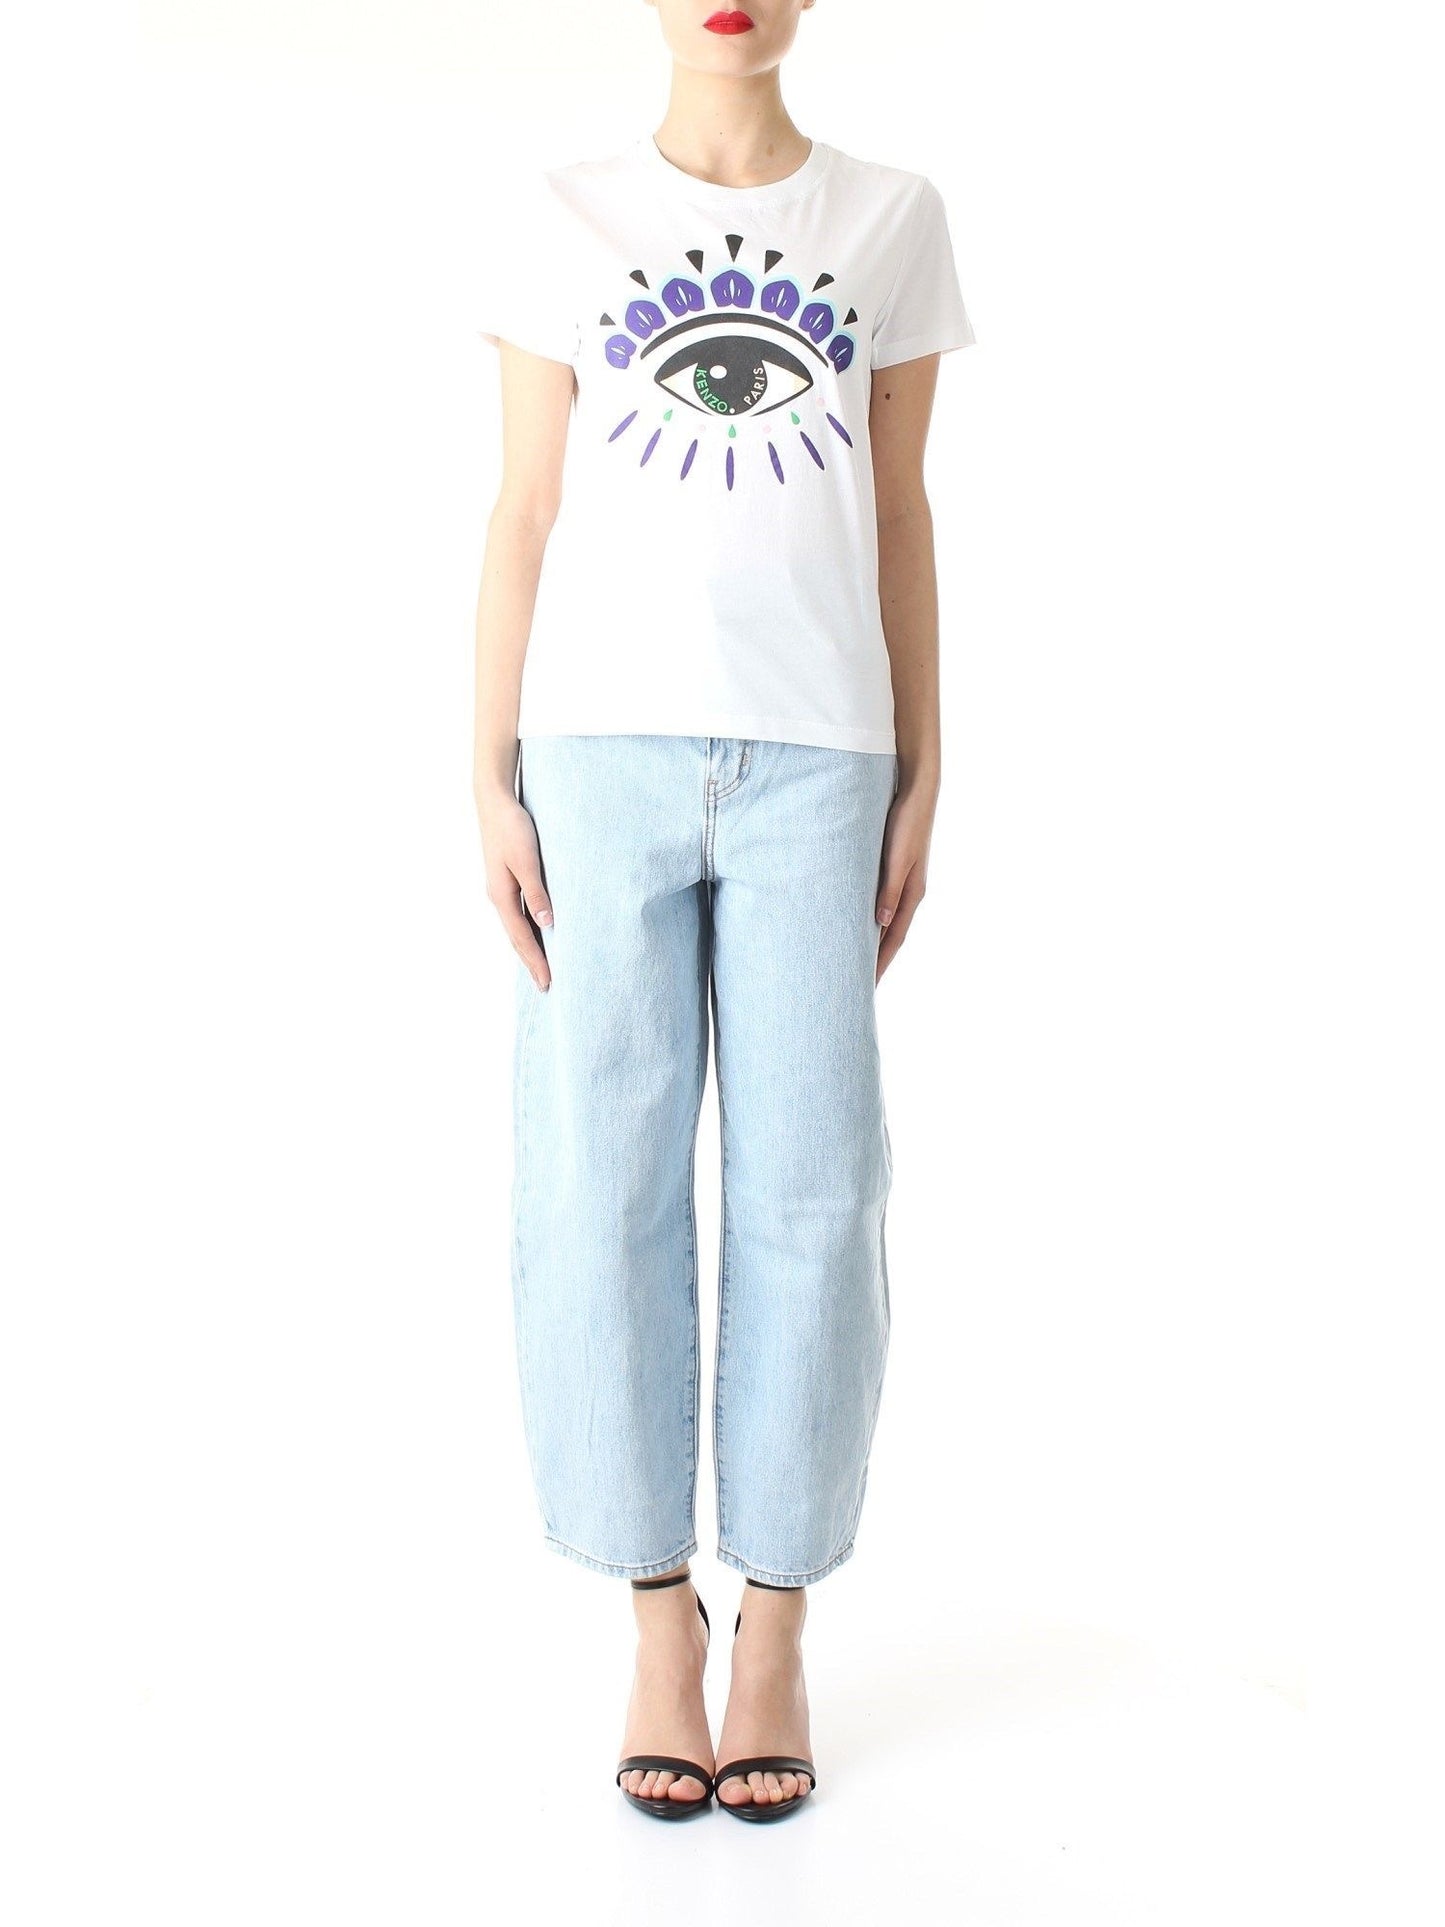 Kenzo Female Puple Eye T-Shirt - Shop Streetwear, Sneakers, Slippers and Gifts online | Malaysia - The Factory KL